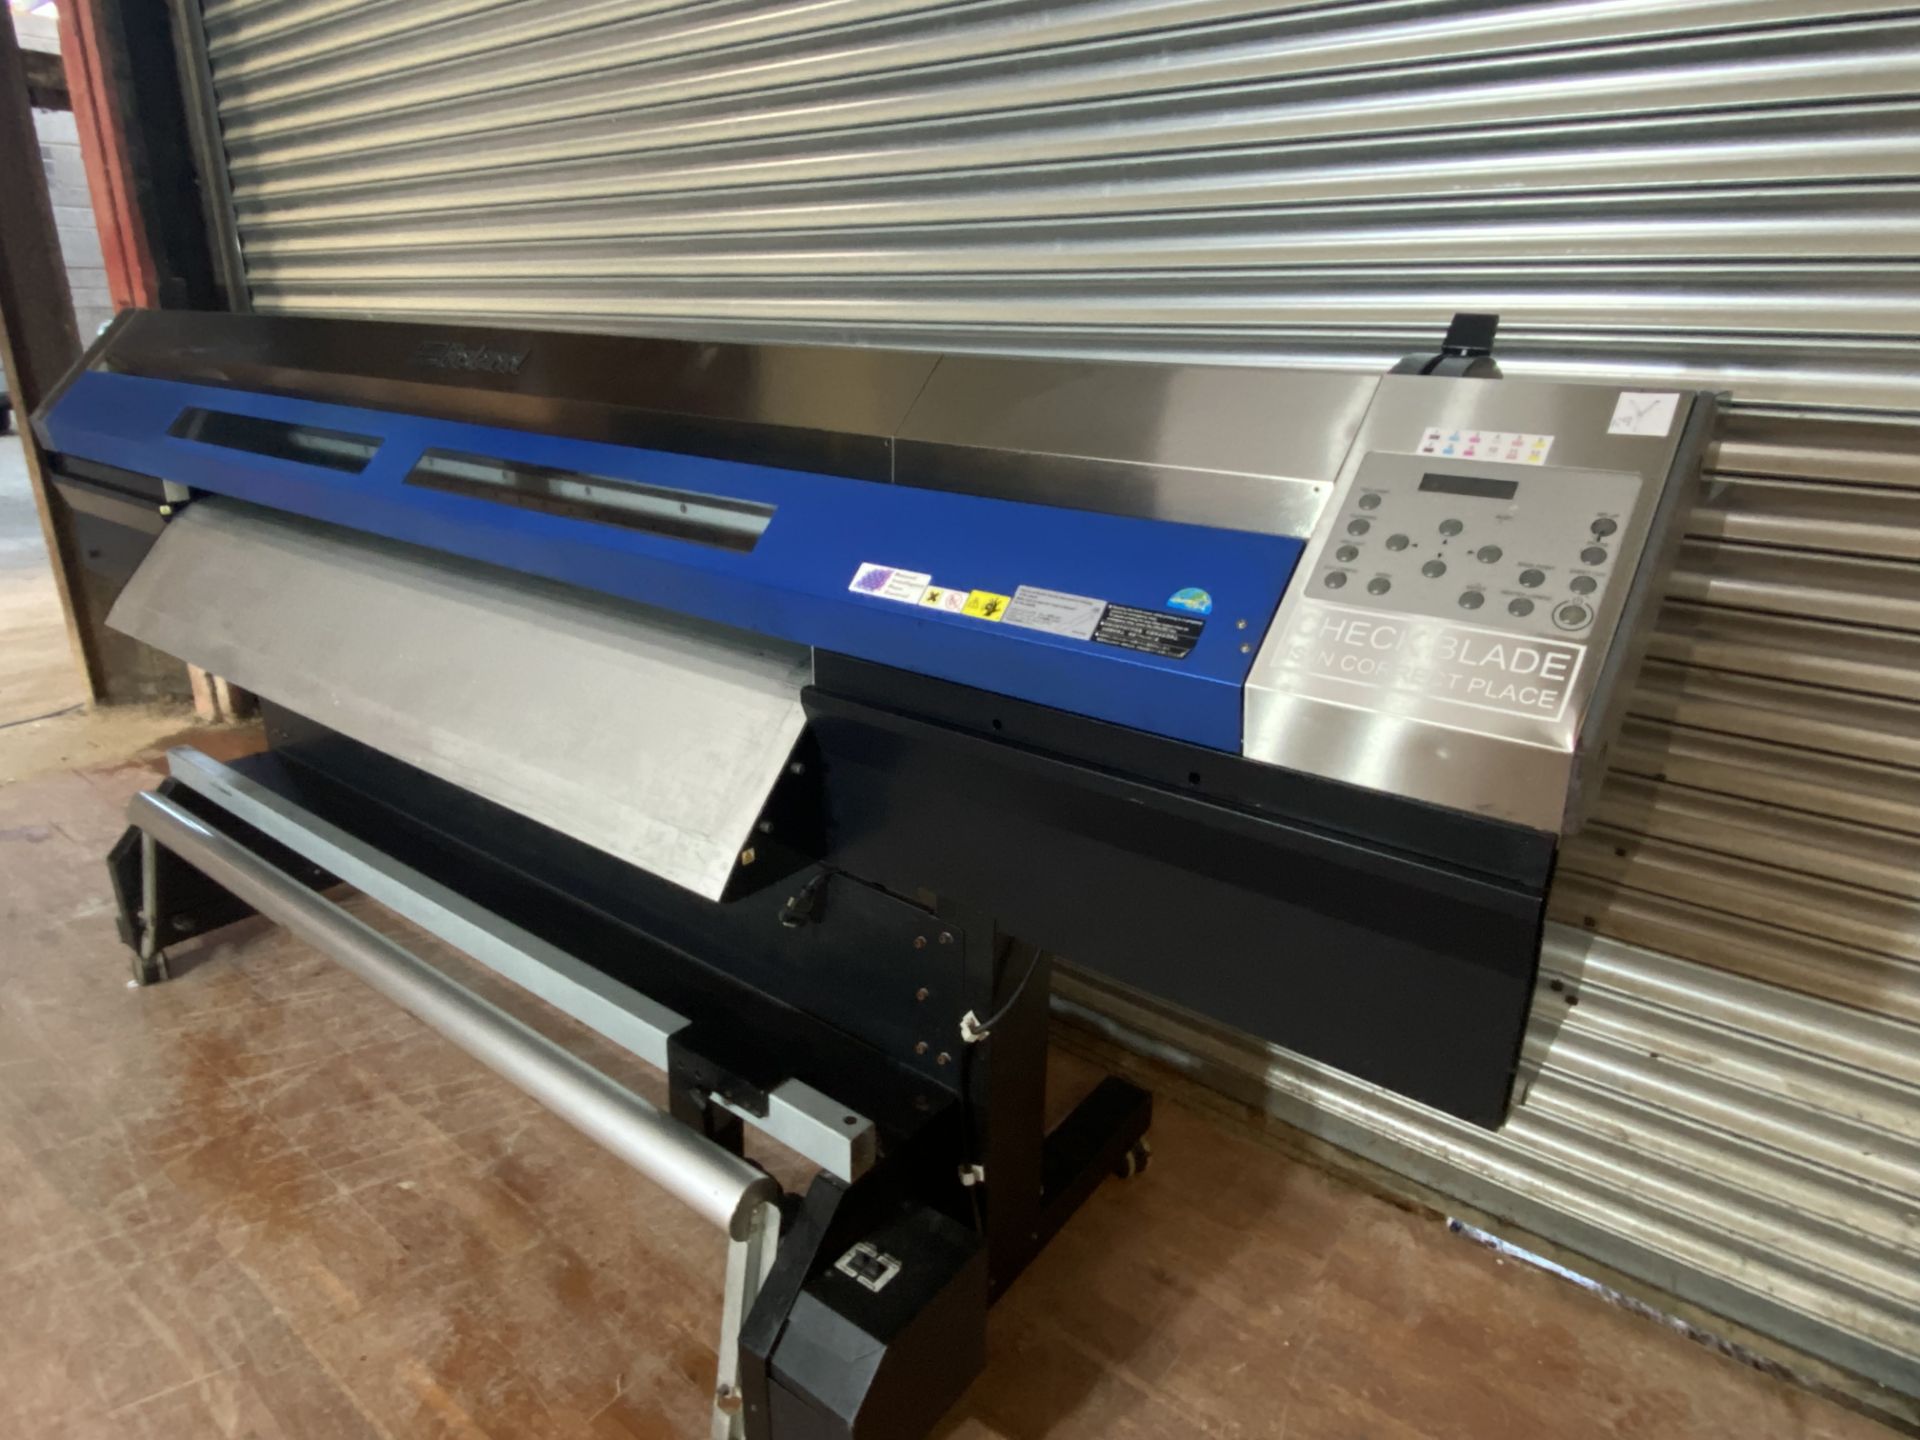 ROLAND XC-540 ECO SOLVENT PRINT AND CUT LARGE FORMAT PRINTER (R9) - Image 2 of 3